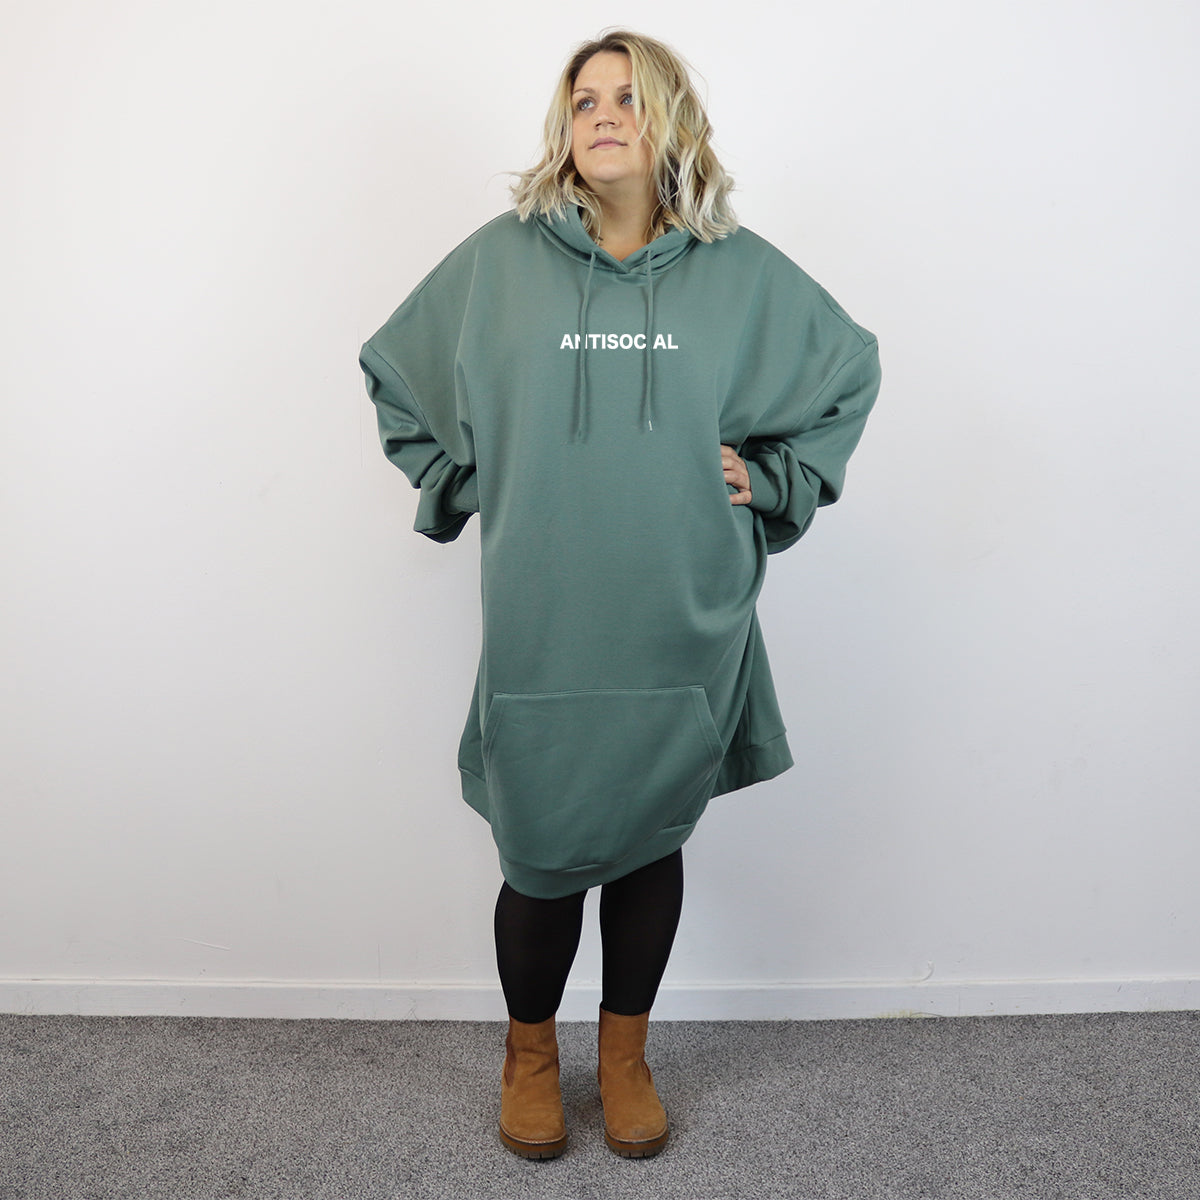 Antisocial - New Style - Huge Size - Oversized Comfy Hoody